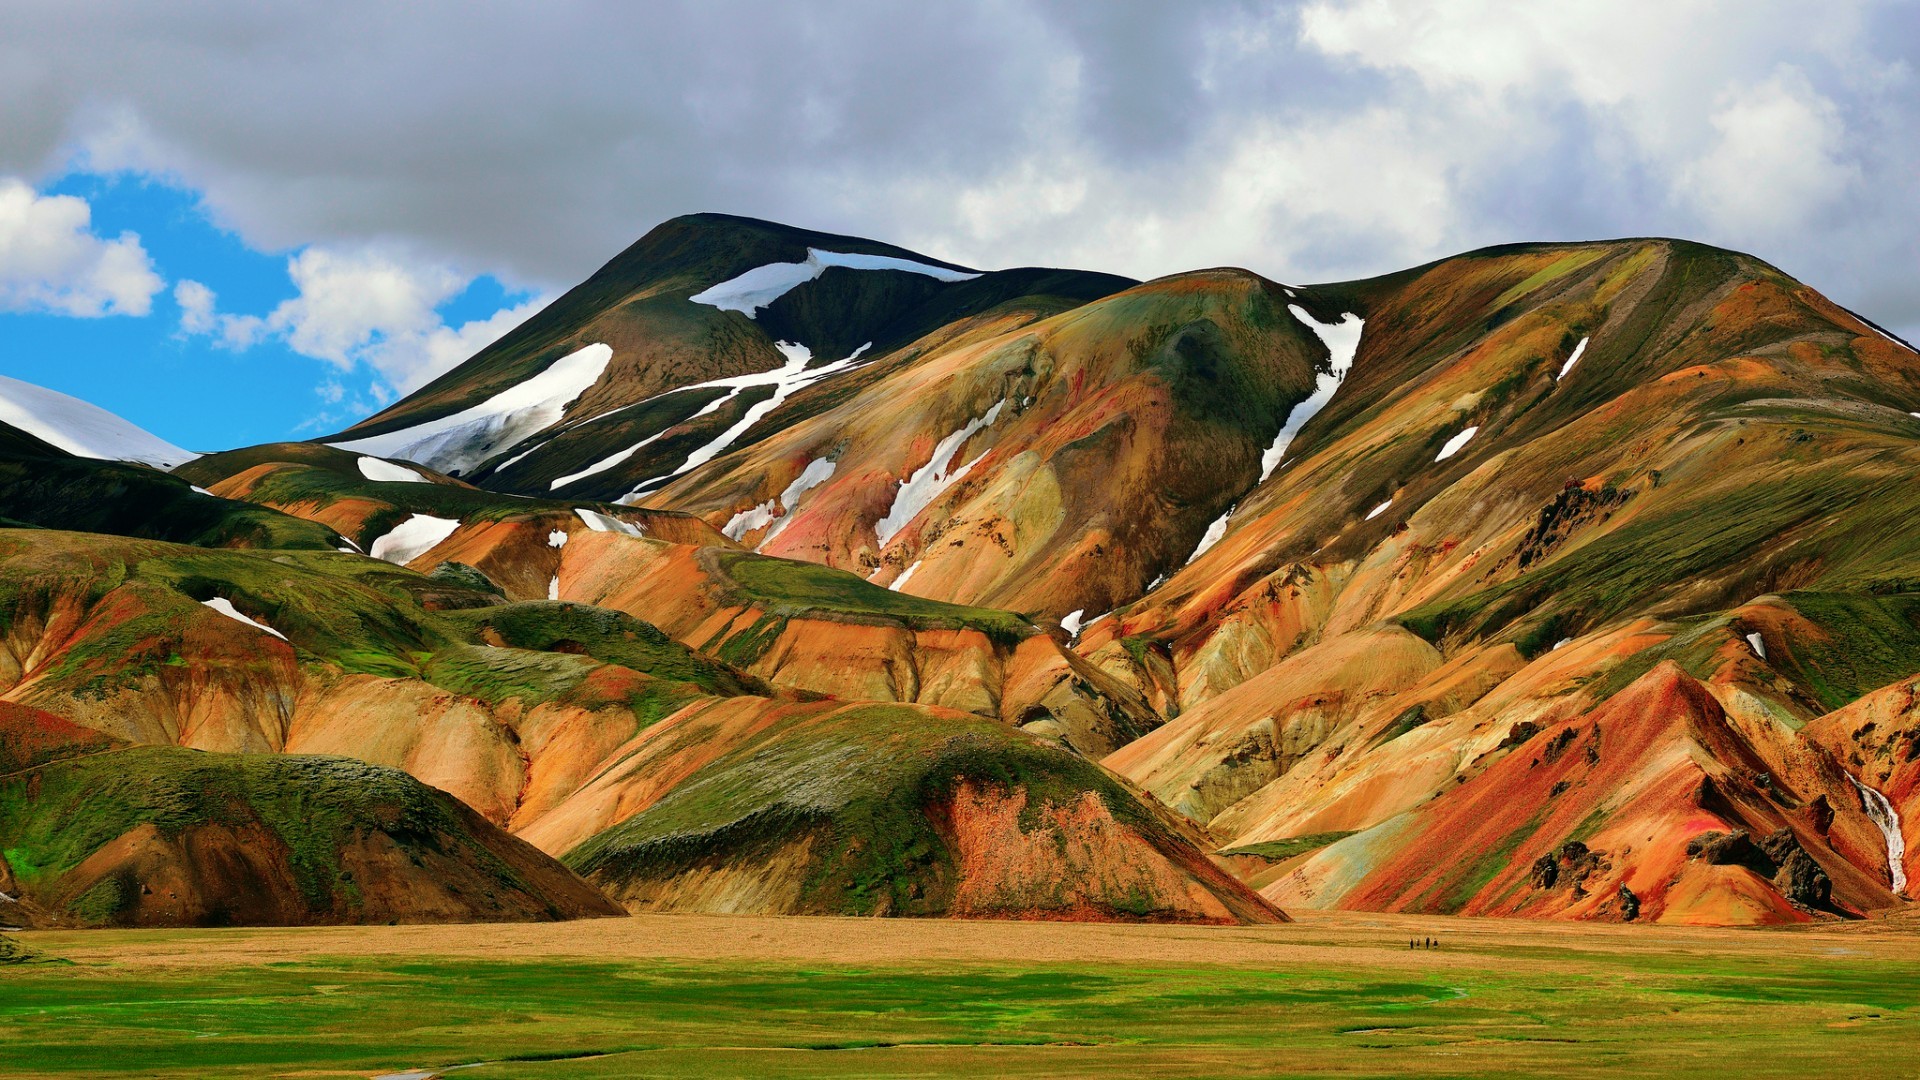 General 1920x1080 nature landscape mountains Iceland snow field hills vibrant snowy mountain nordic landscapes